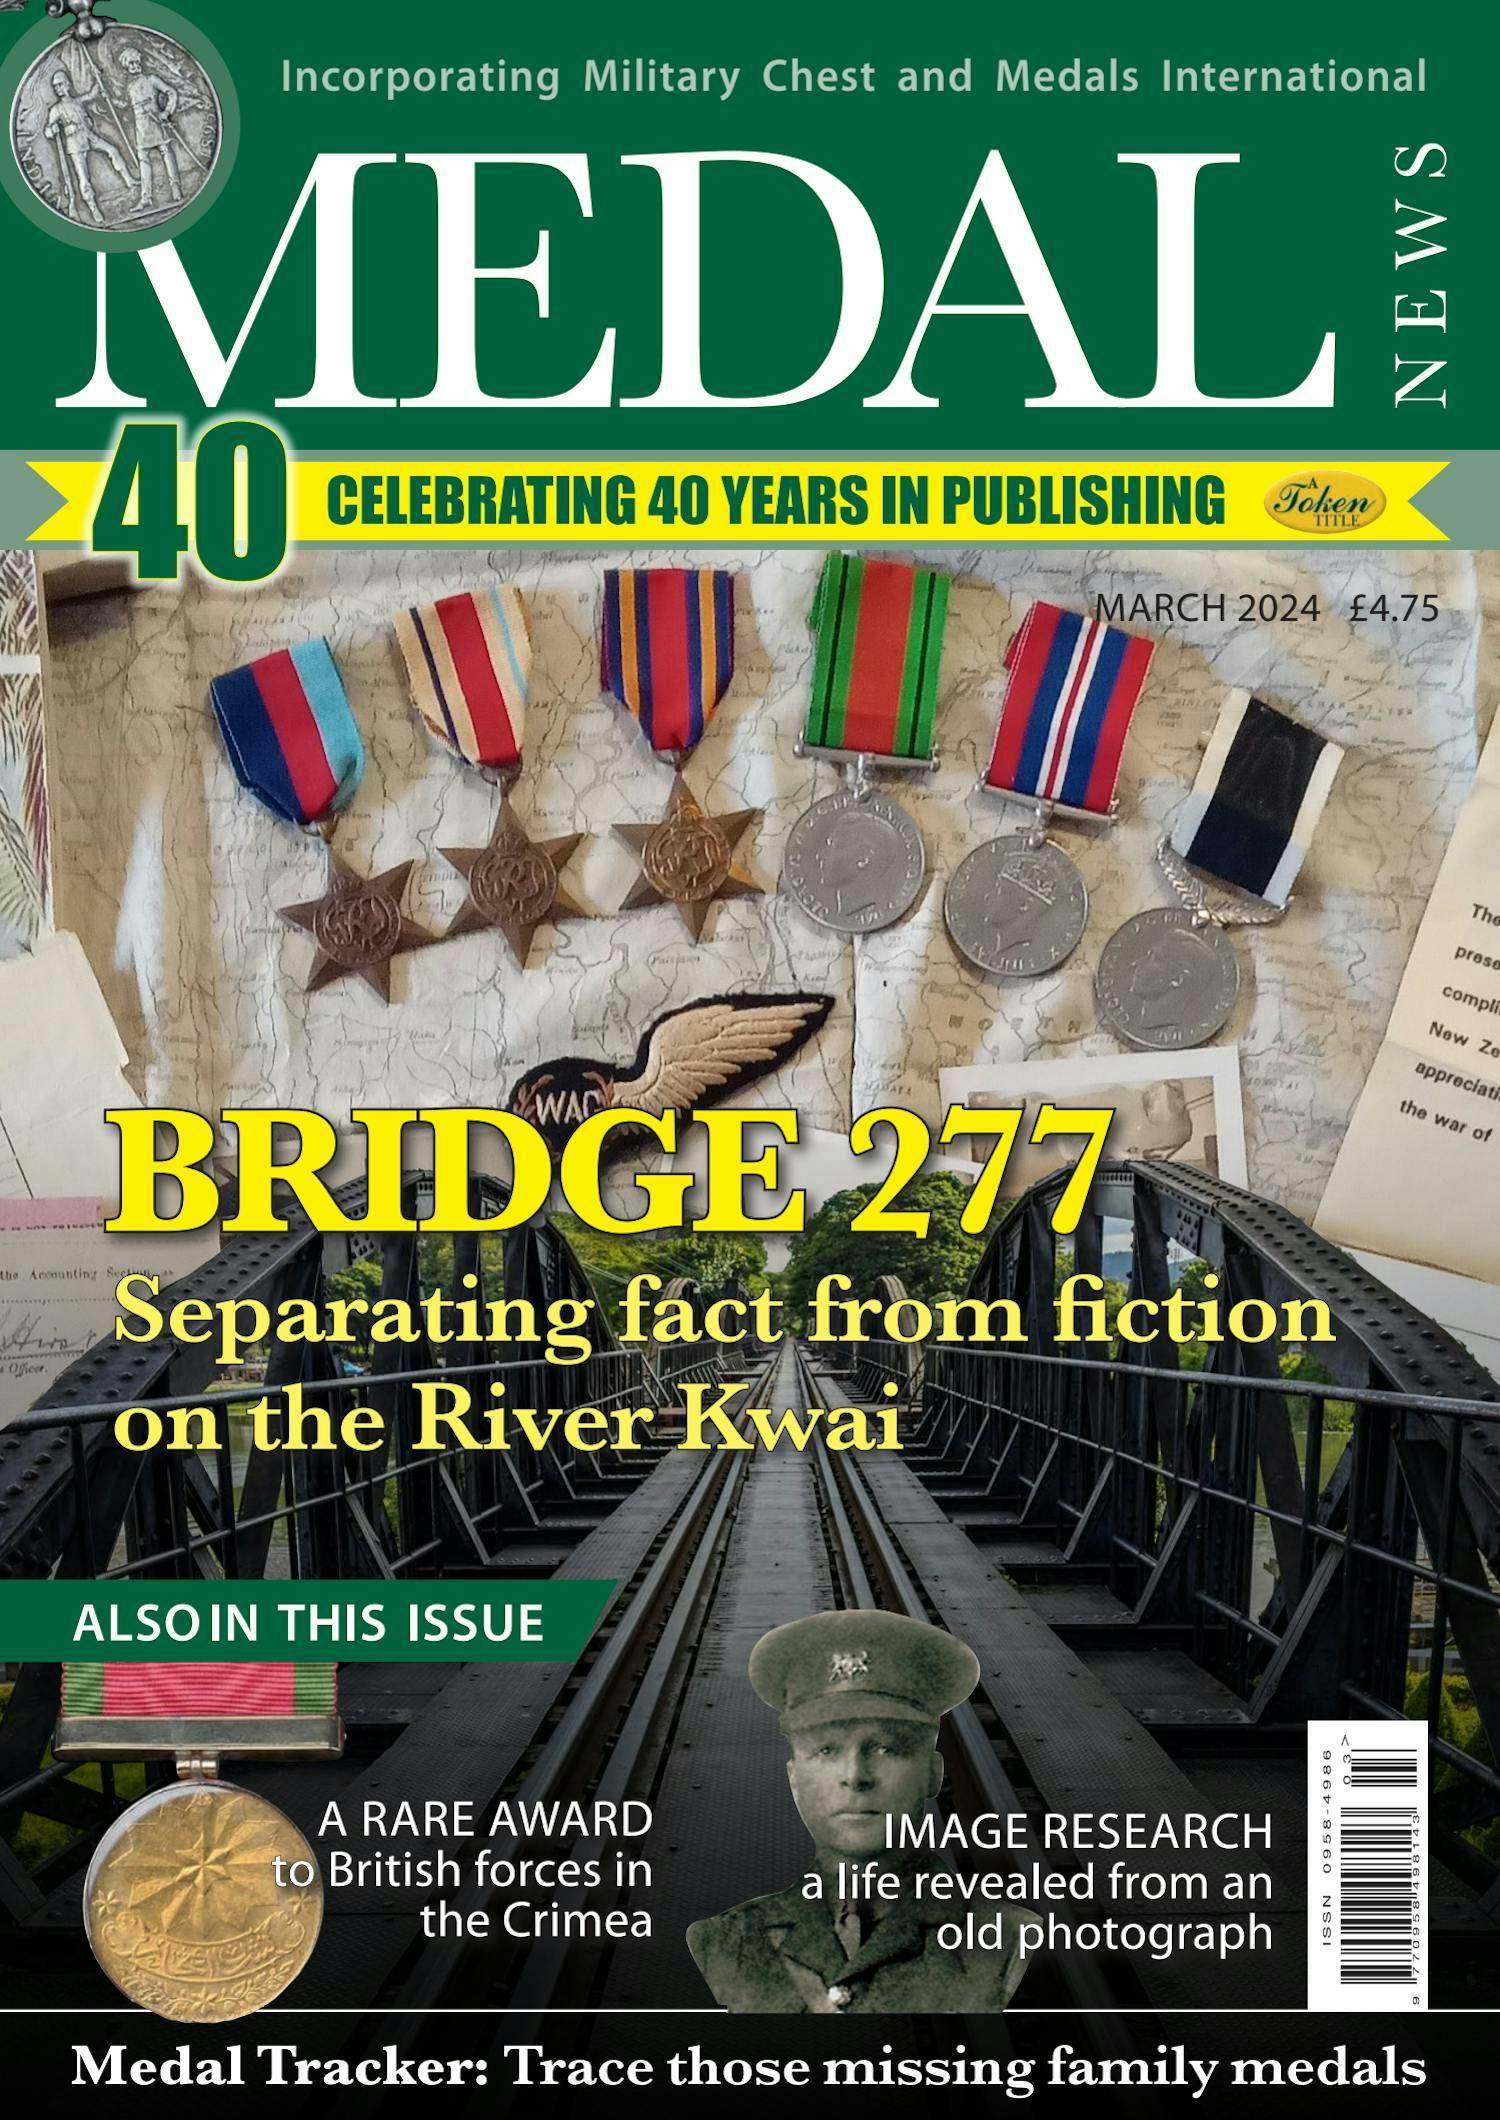 The front cover of Medal News, Volume 62, Number 3, March 2024